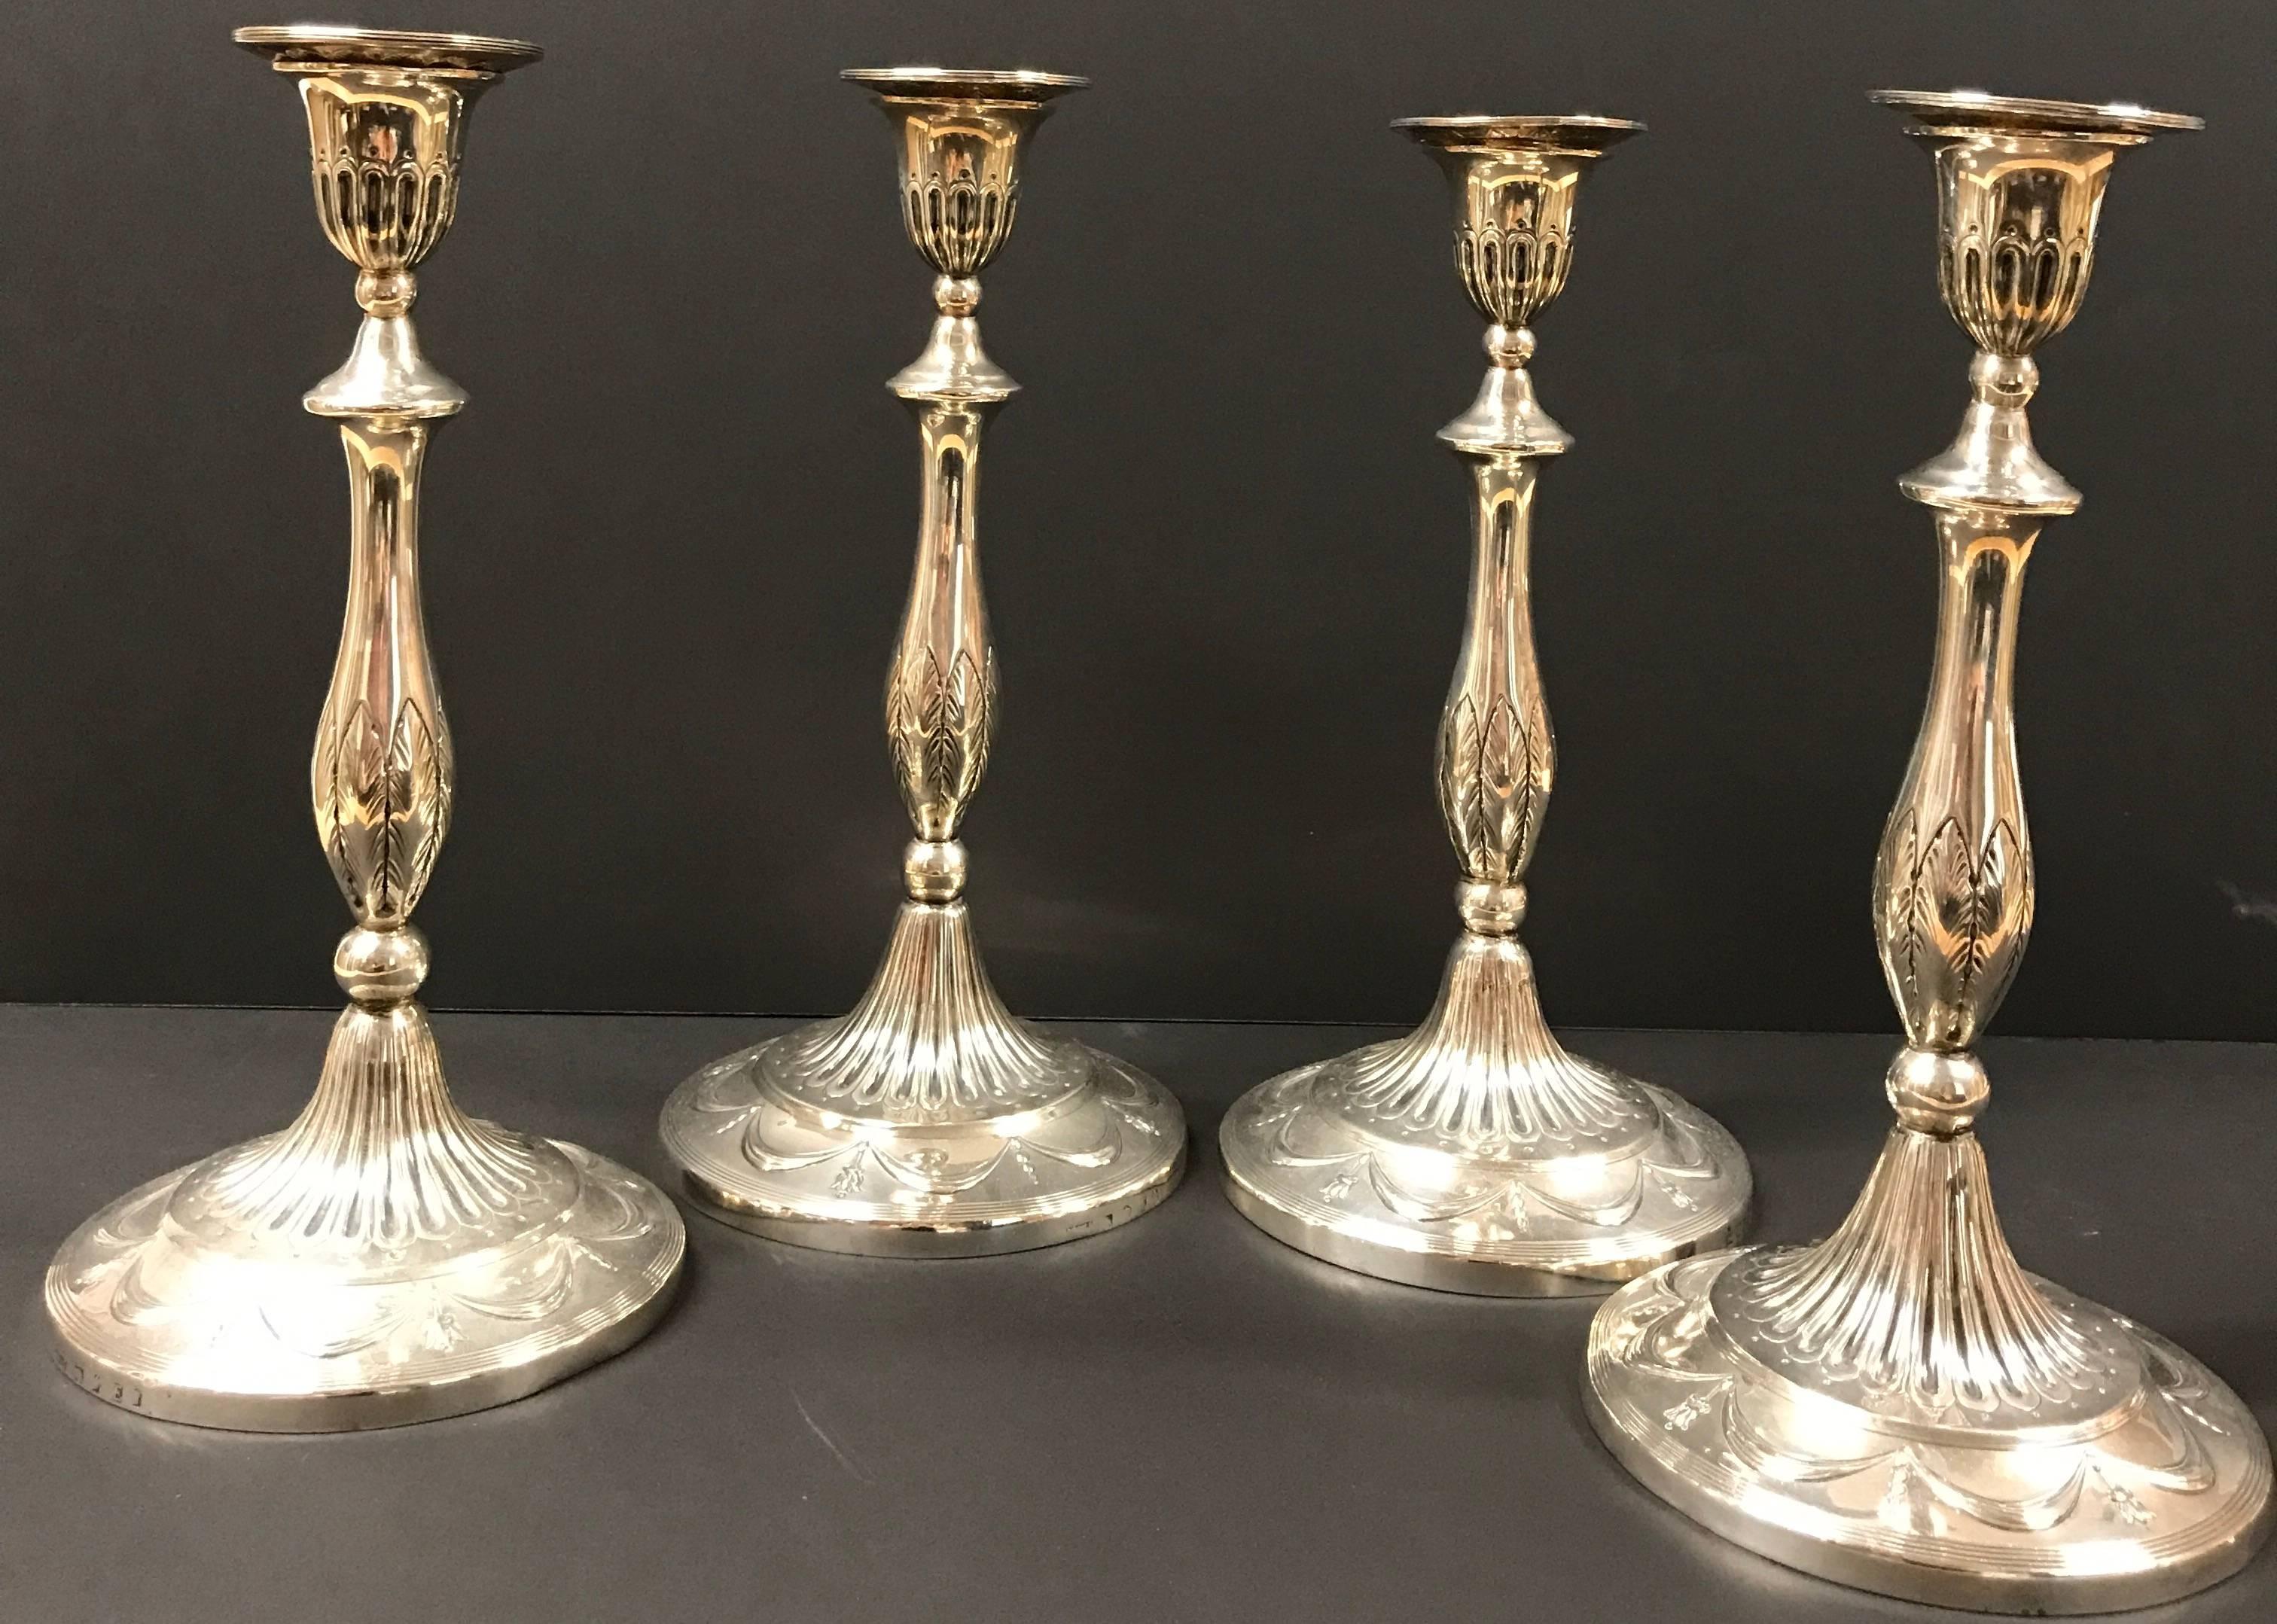 Remarkable Set of Four (4) George III Sterling Candlesticks, 1799 - Art by John Green, Roberts, Mosley & Co.